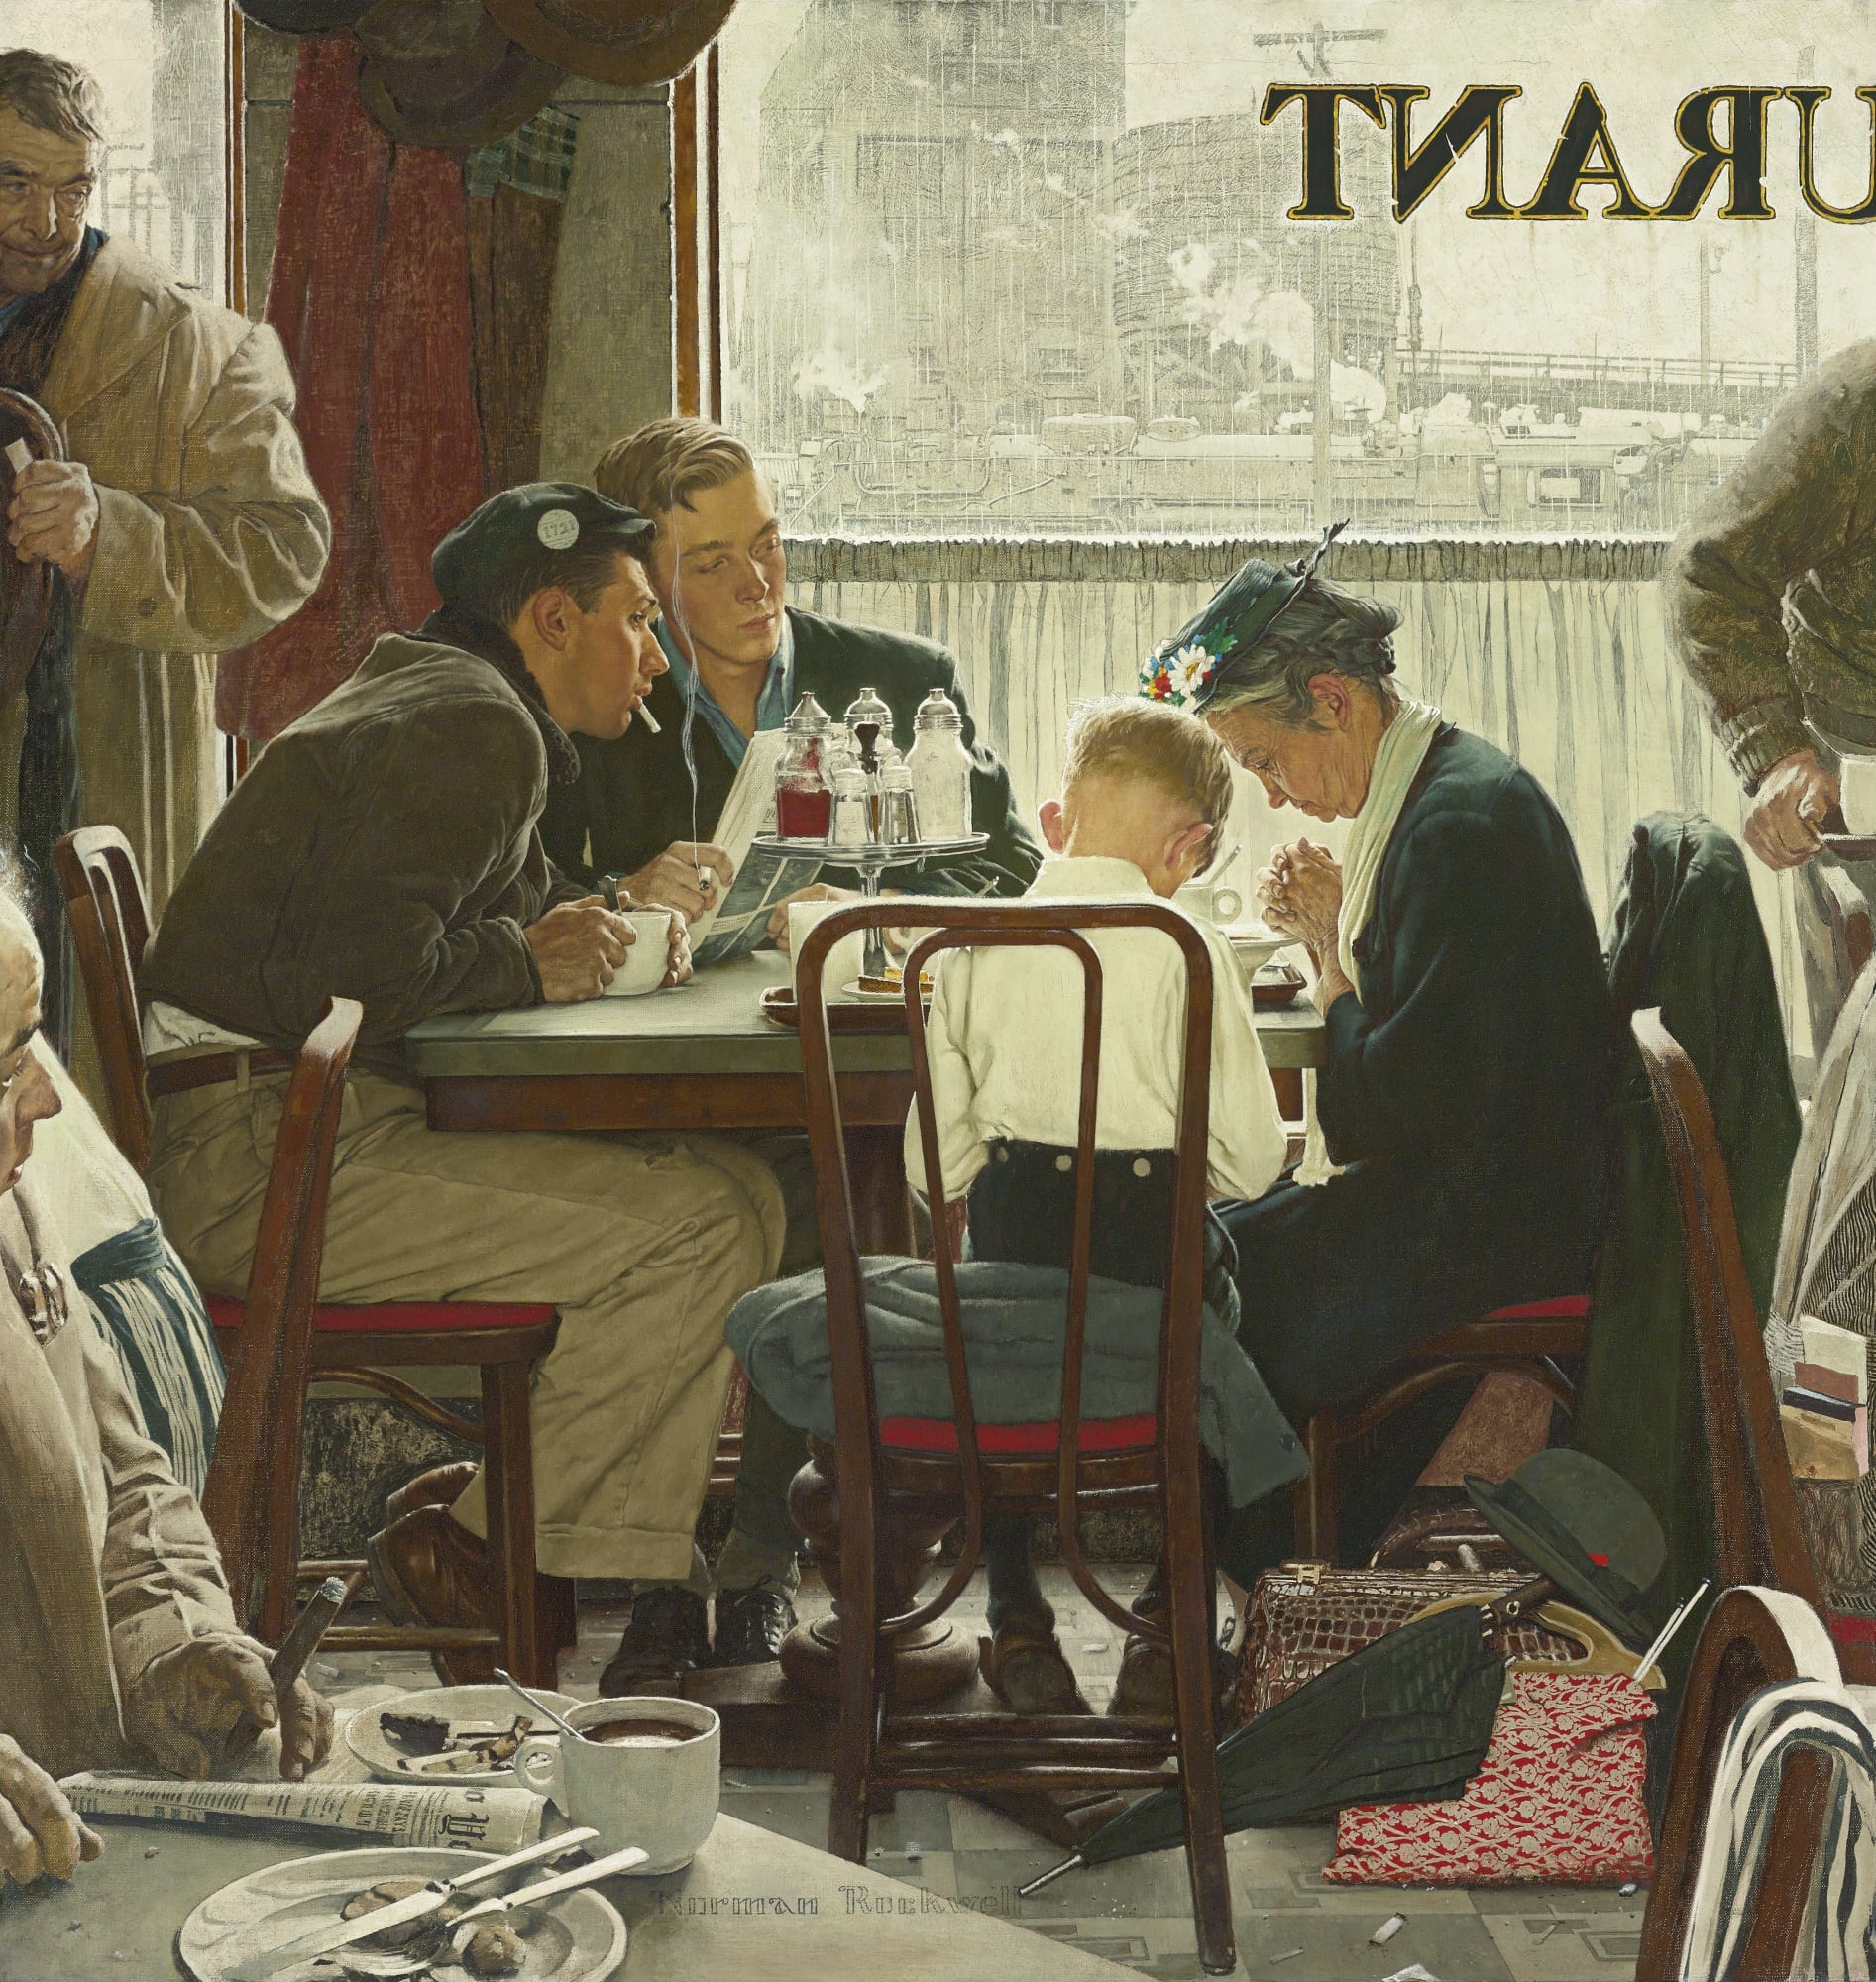 “Saying grace” di Norman Rockwell a 46 mio$ da Sotheby’s